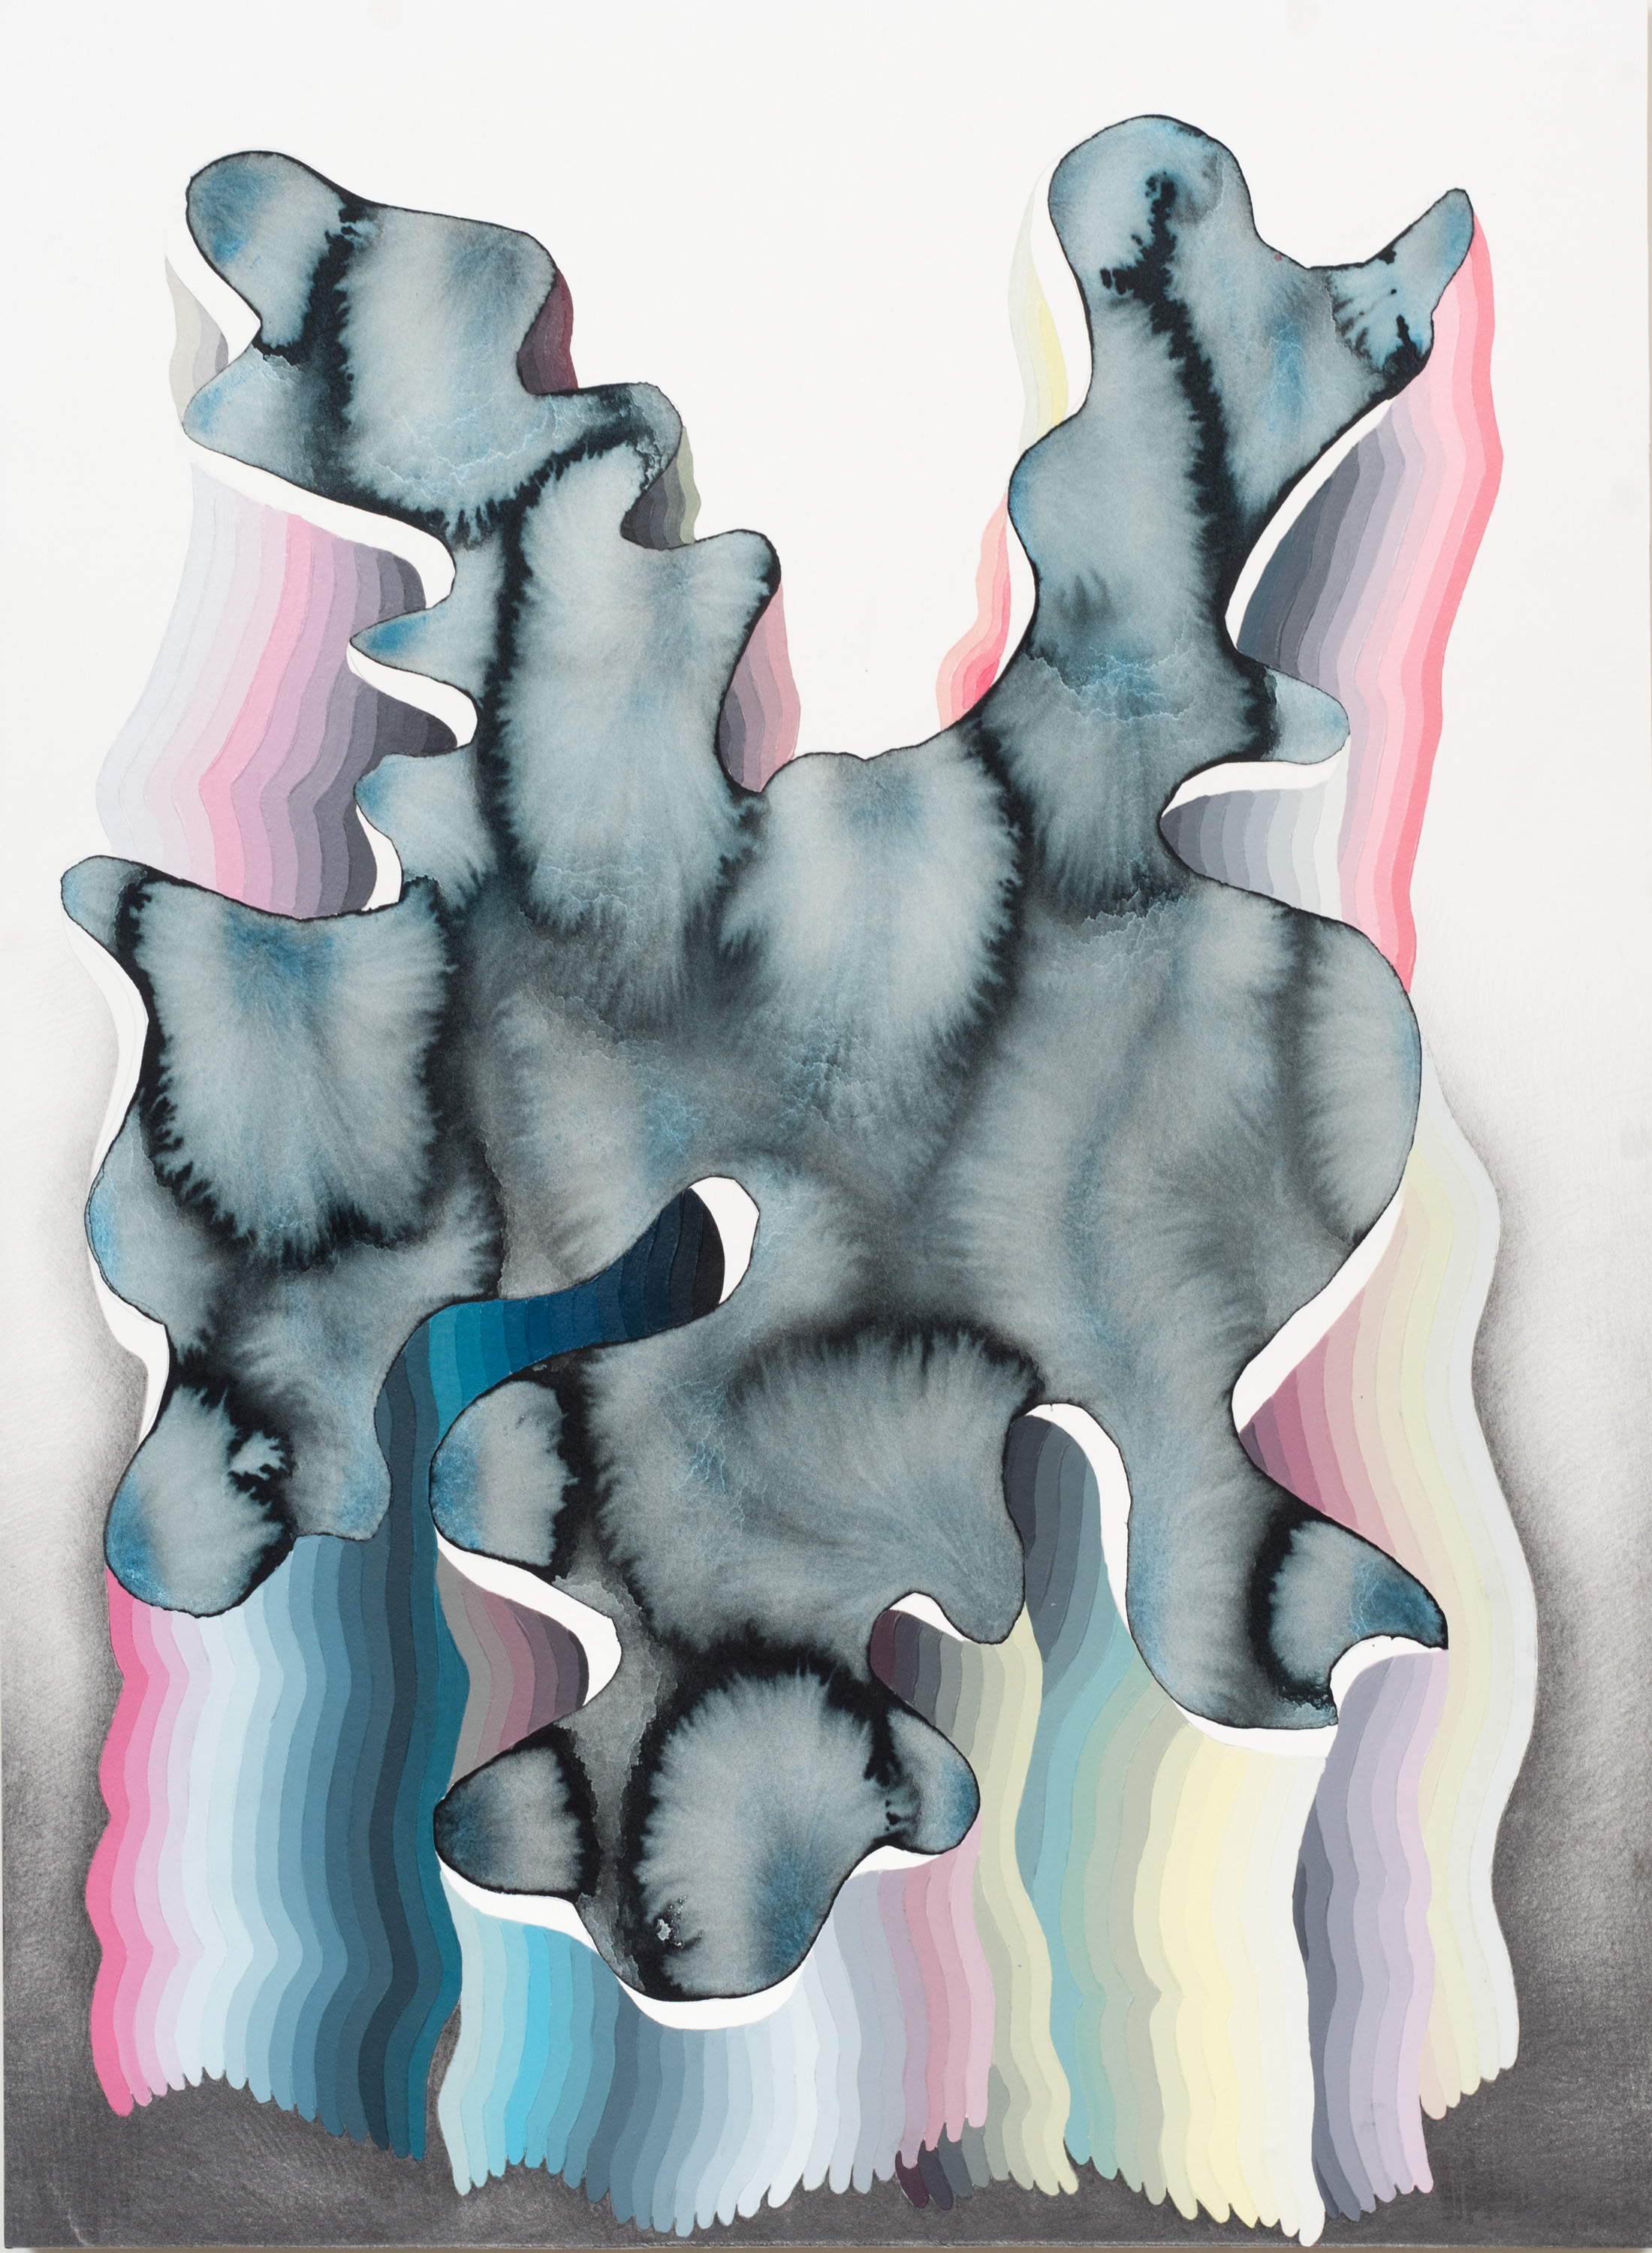  Justin Margitich  Variations 10 , 2015 Acrylic, watercolor and pencil on panel 30 x 22 inches 